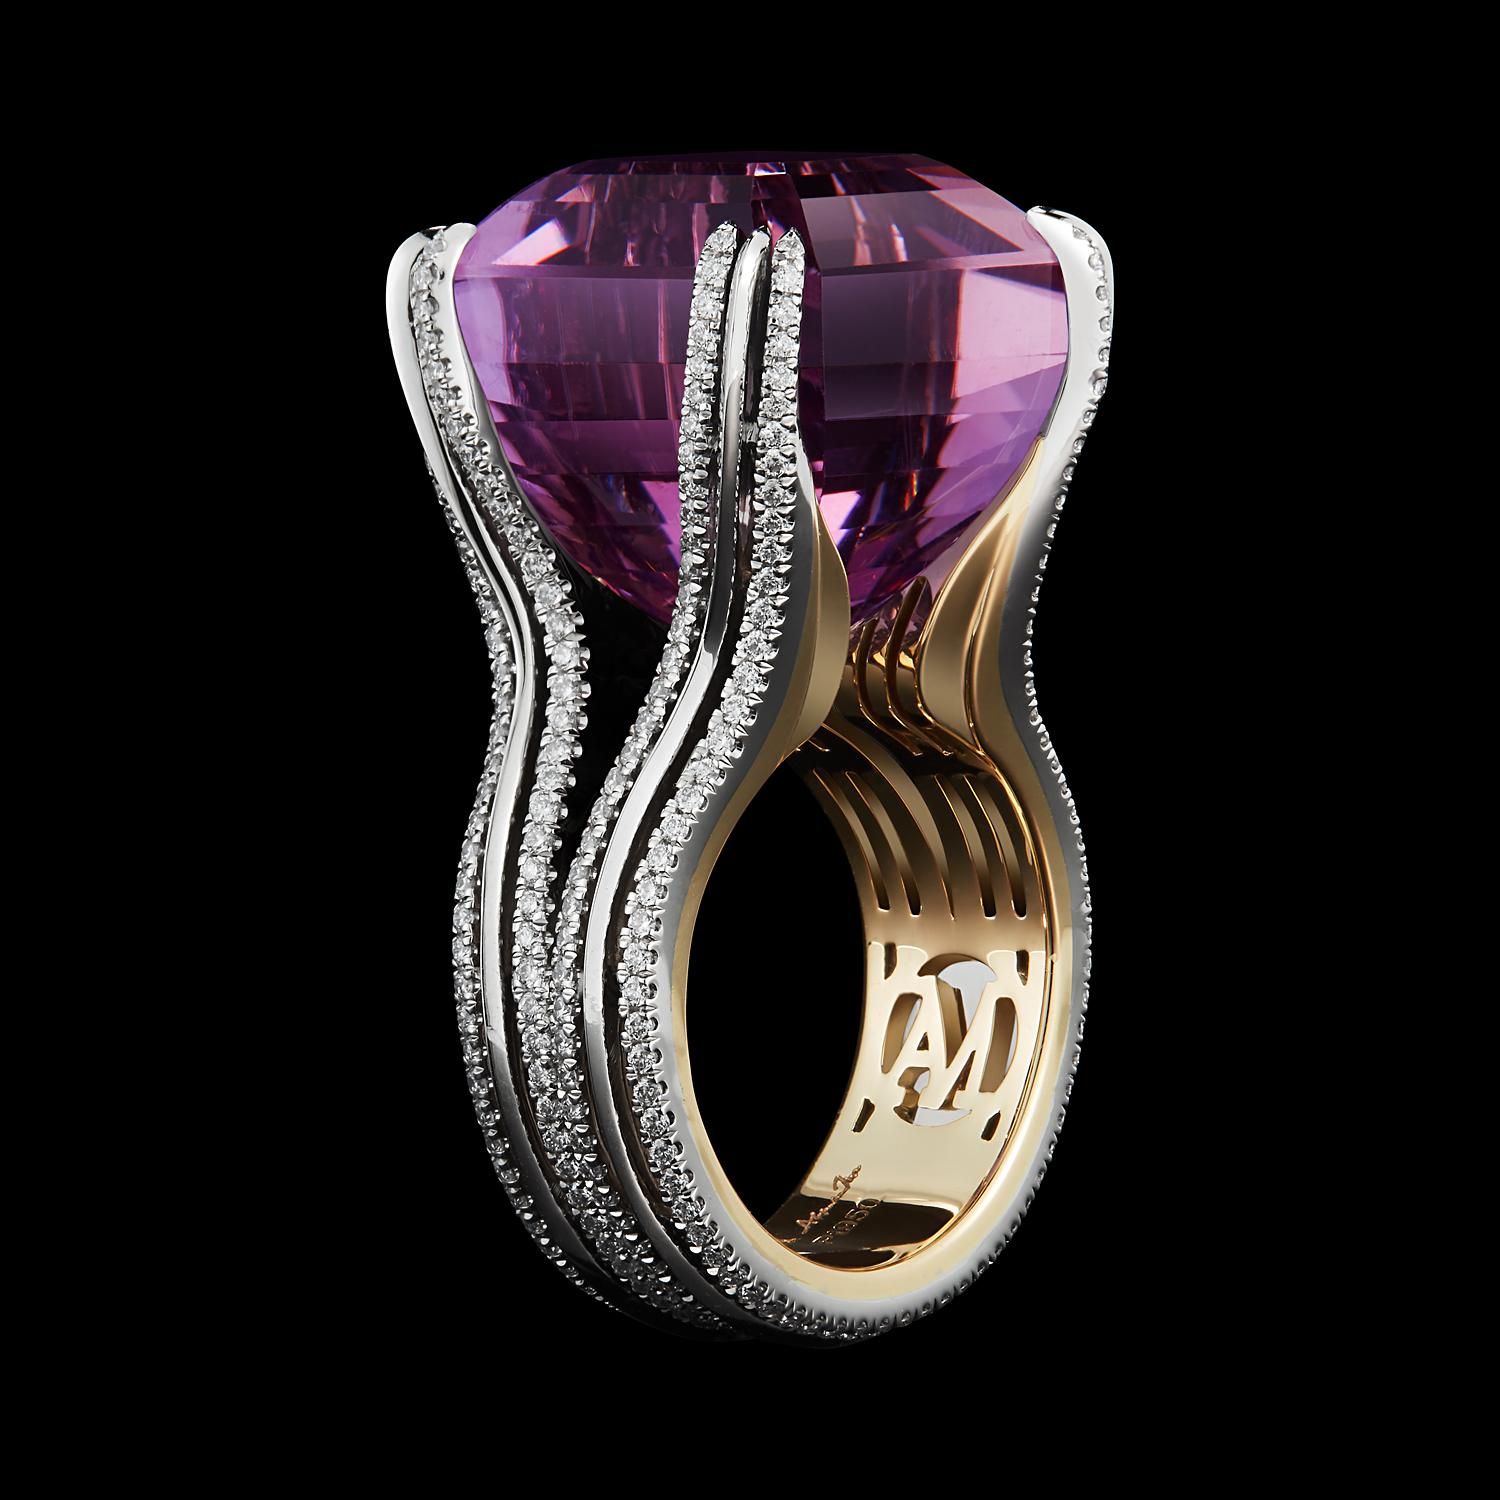 *Please contact us for more information on this piece or on creating your own Alexandra Mor custom Design. 

This One-of-A-Kind Alexandra Mor ring featuring a 33.5 carat Asscher-cut Amethyst is set with Alexandra Mor's signature details of double